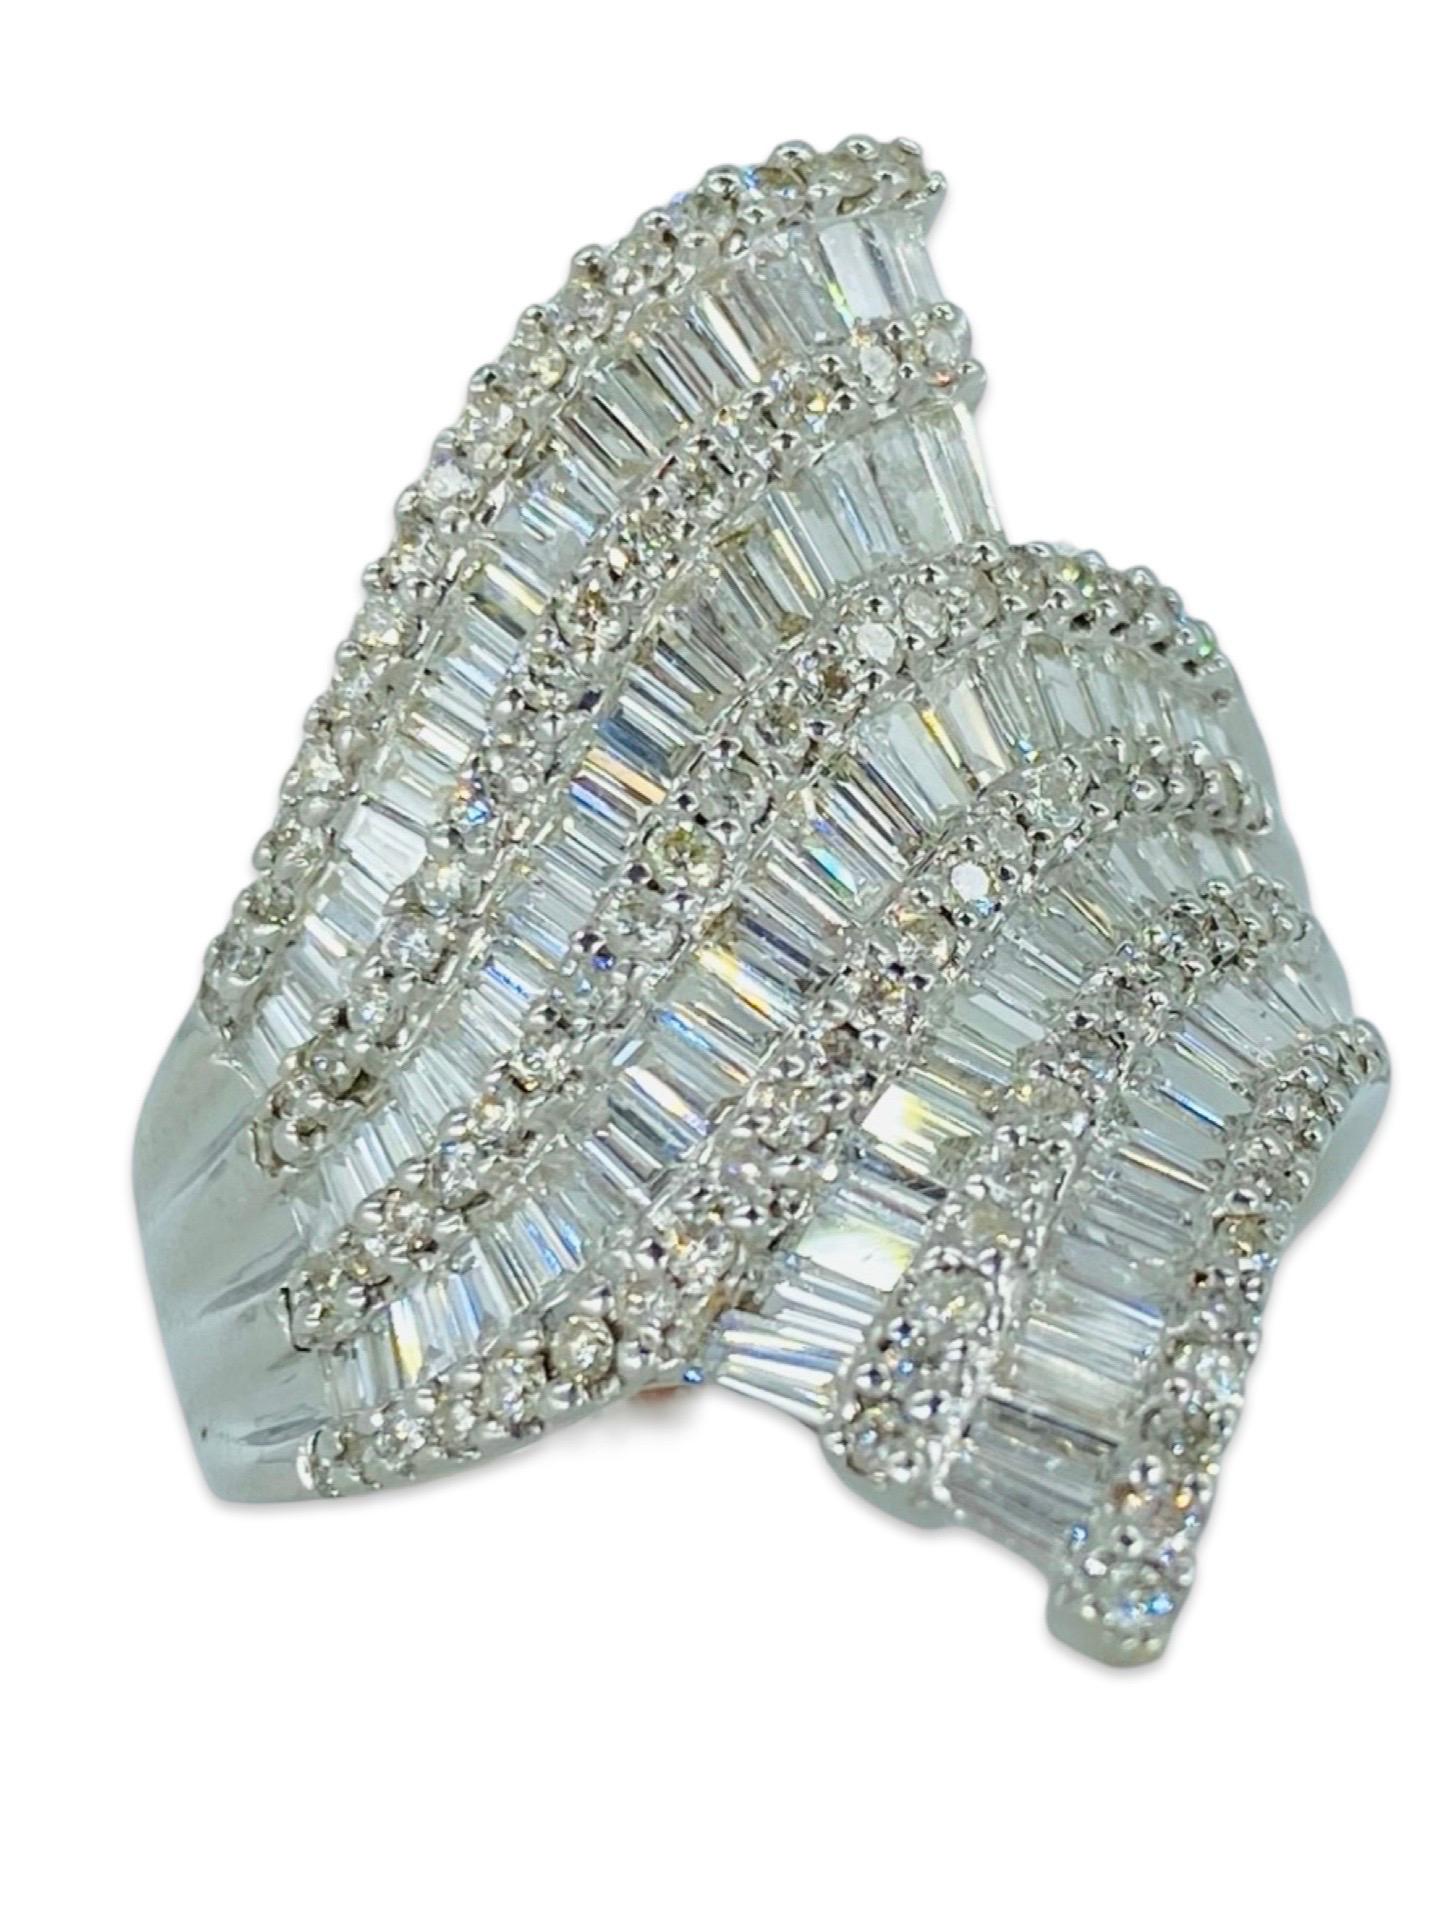 Signed 2.51 Carat Baguette Cut Diamonds 5-Row Ring 18k White Gold In Excellent Condition For Sale In Miami, FL